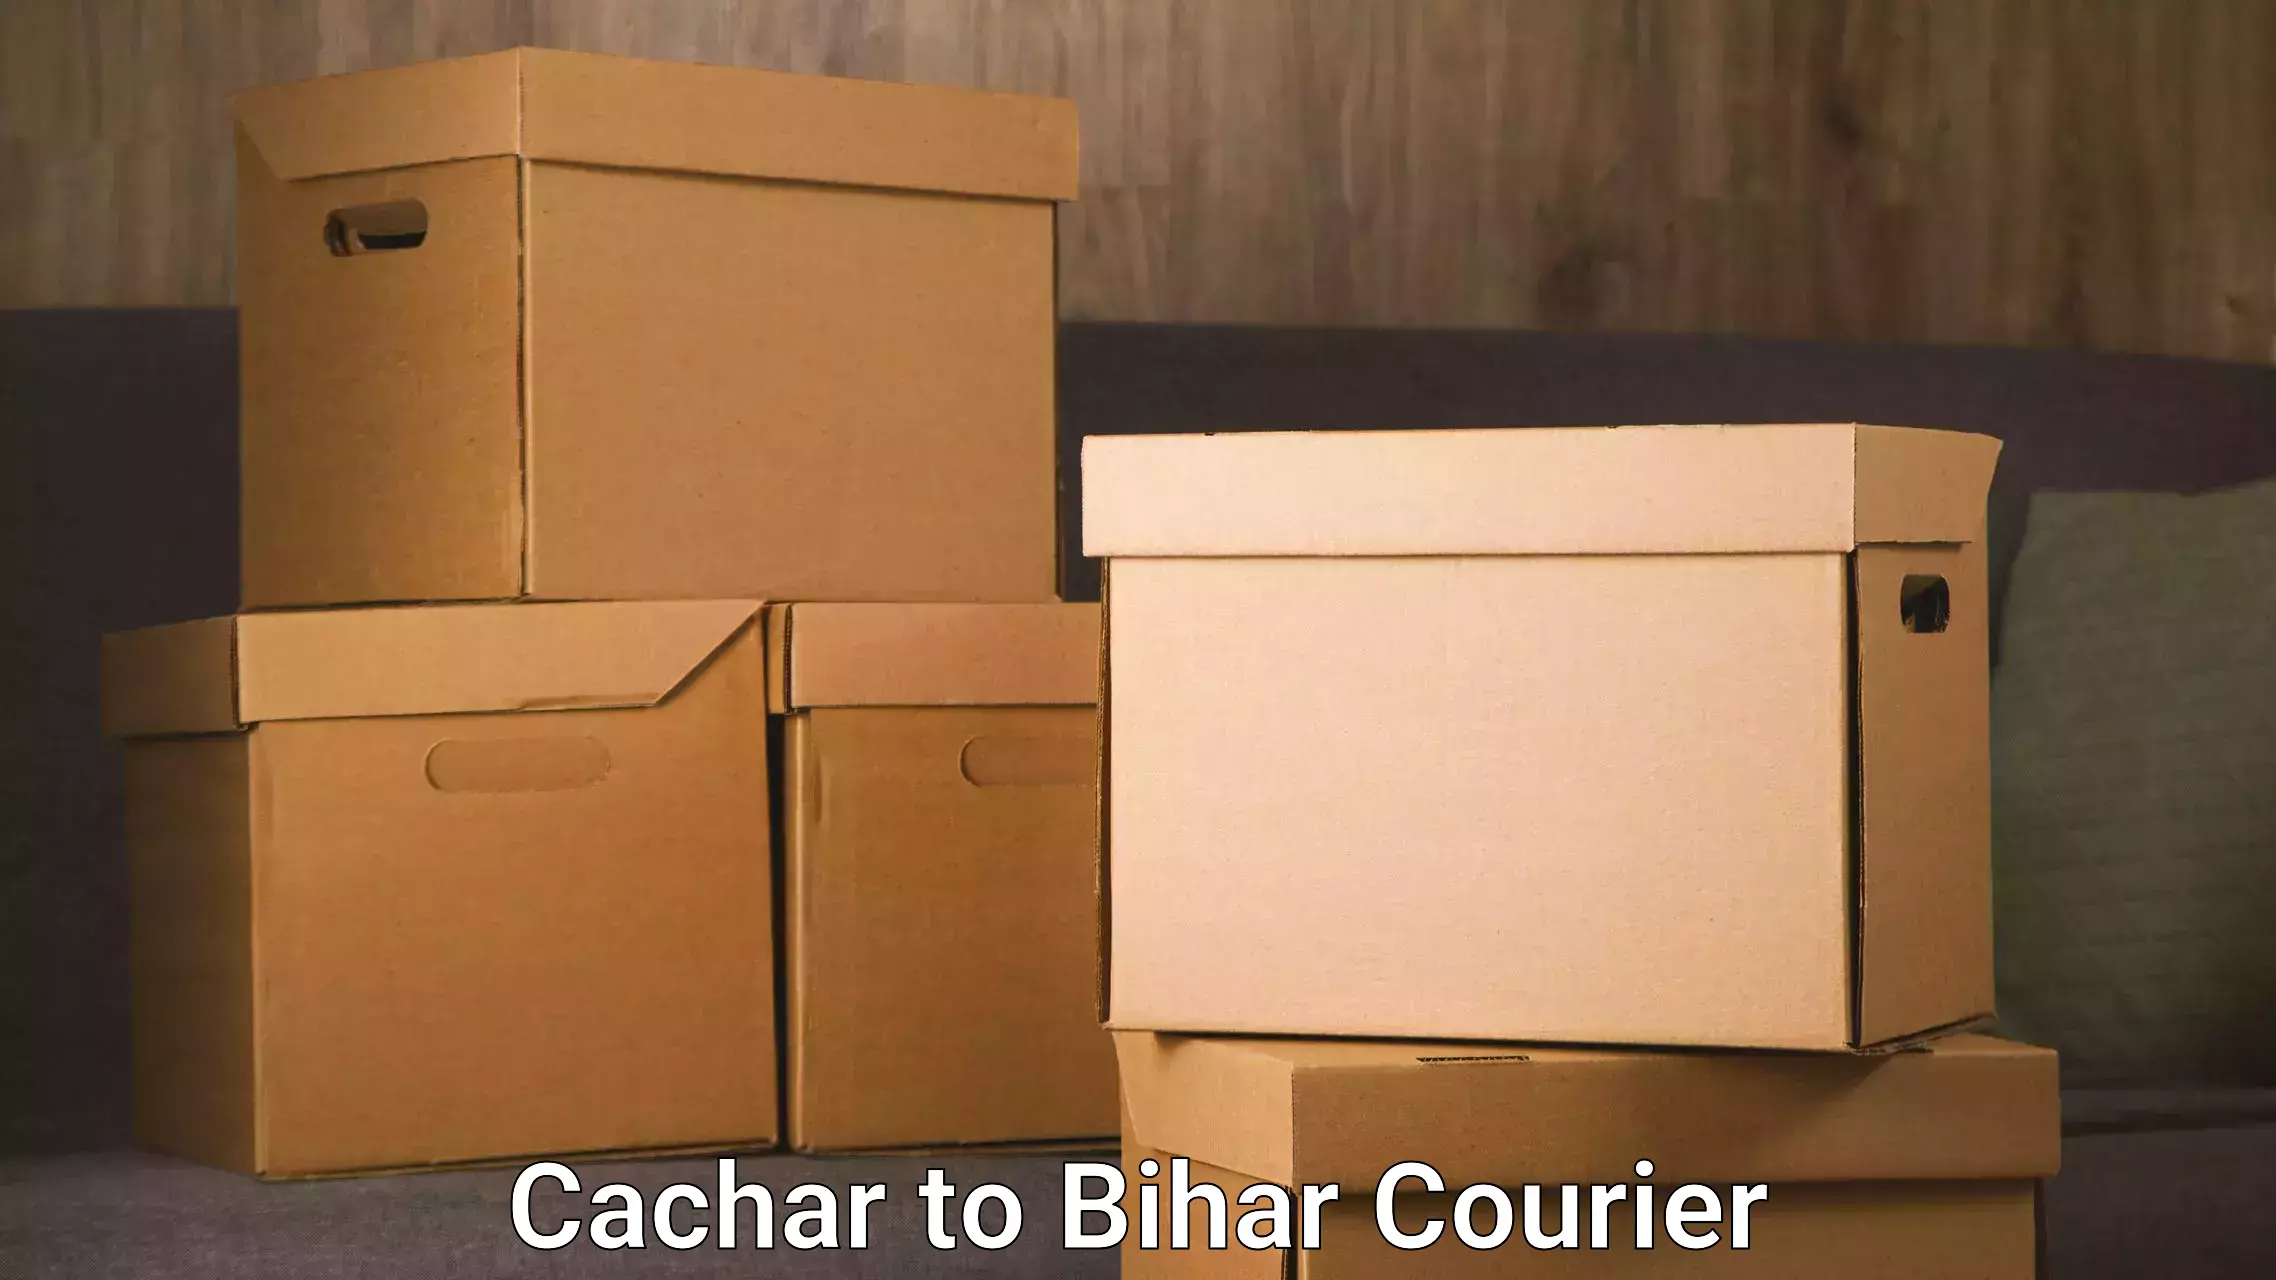 Reliable shipping partners Cachar to Bihar